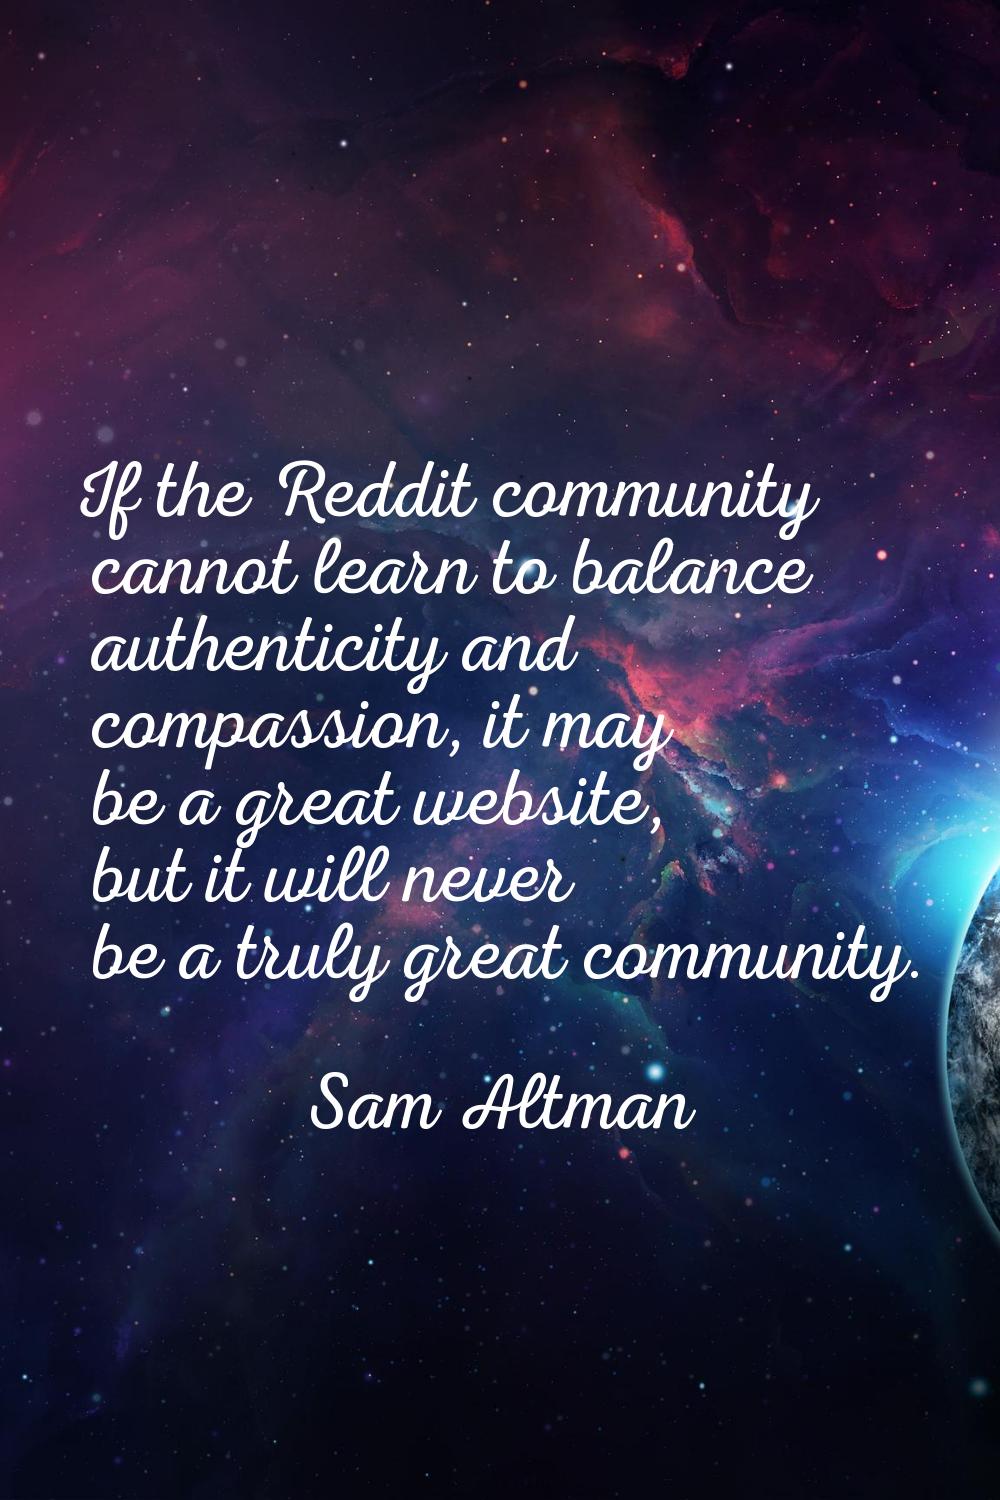 If the Reddit community cannot learn to balance authenticity and compassion, it may be a great webs